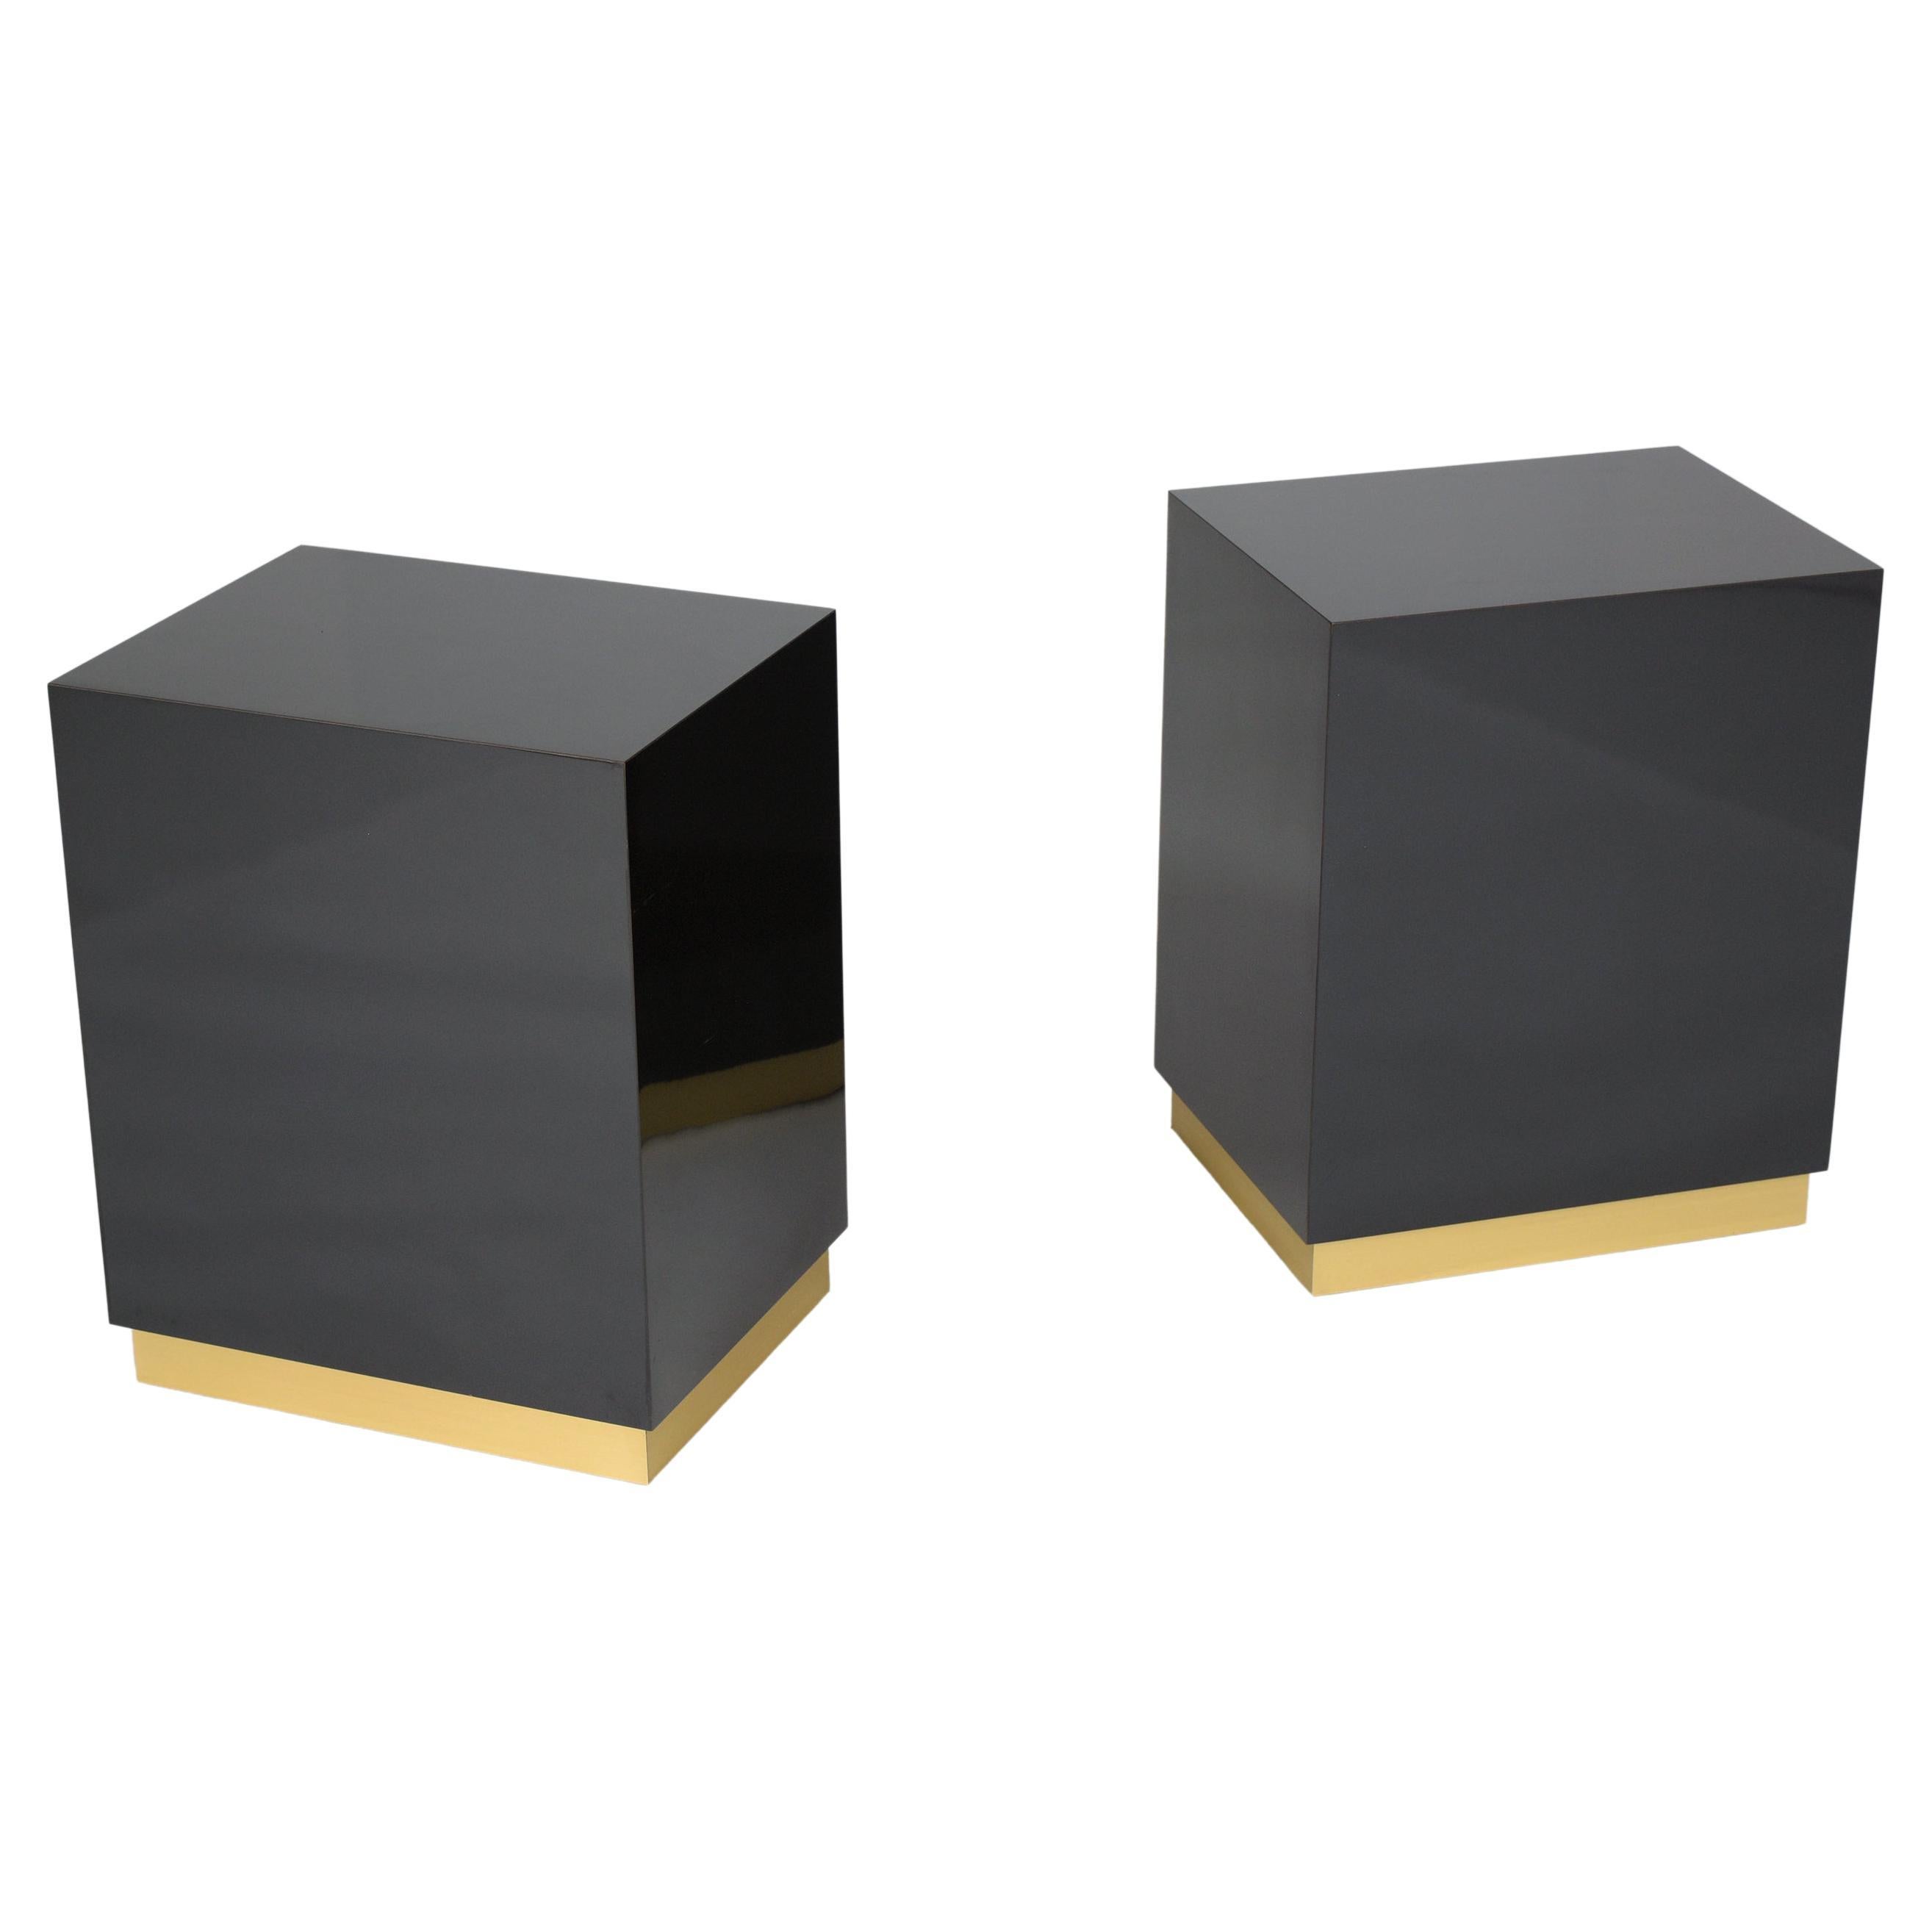 Extraordinary two mid-century modern black end tables in great condition hand-crafted out of laminate wood and are in good condition. This pair of sleek vintage side pedestal tables features rectangular design table-tops covered in ebonized color